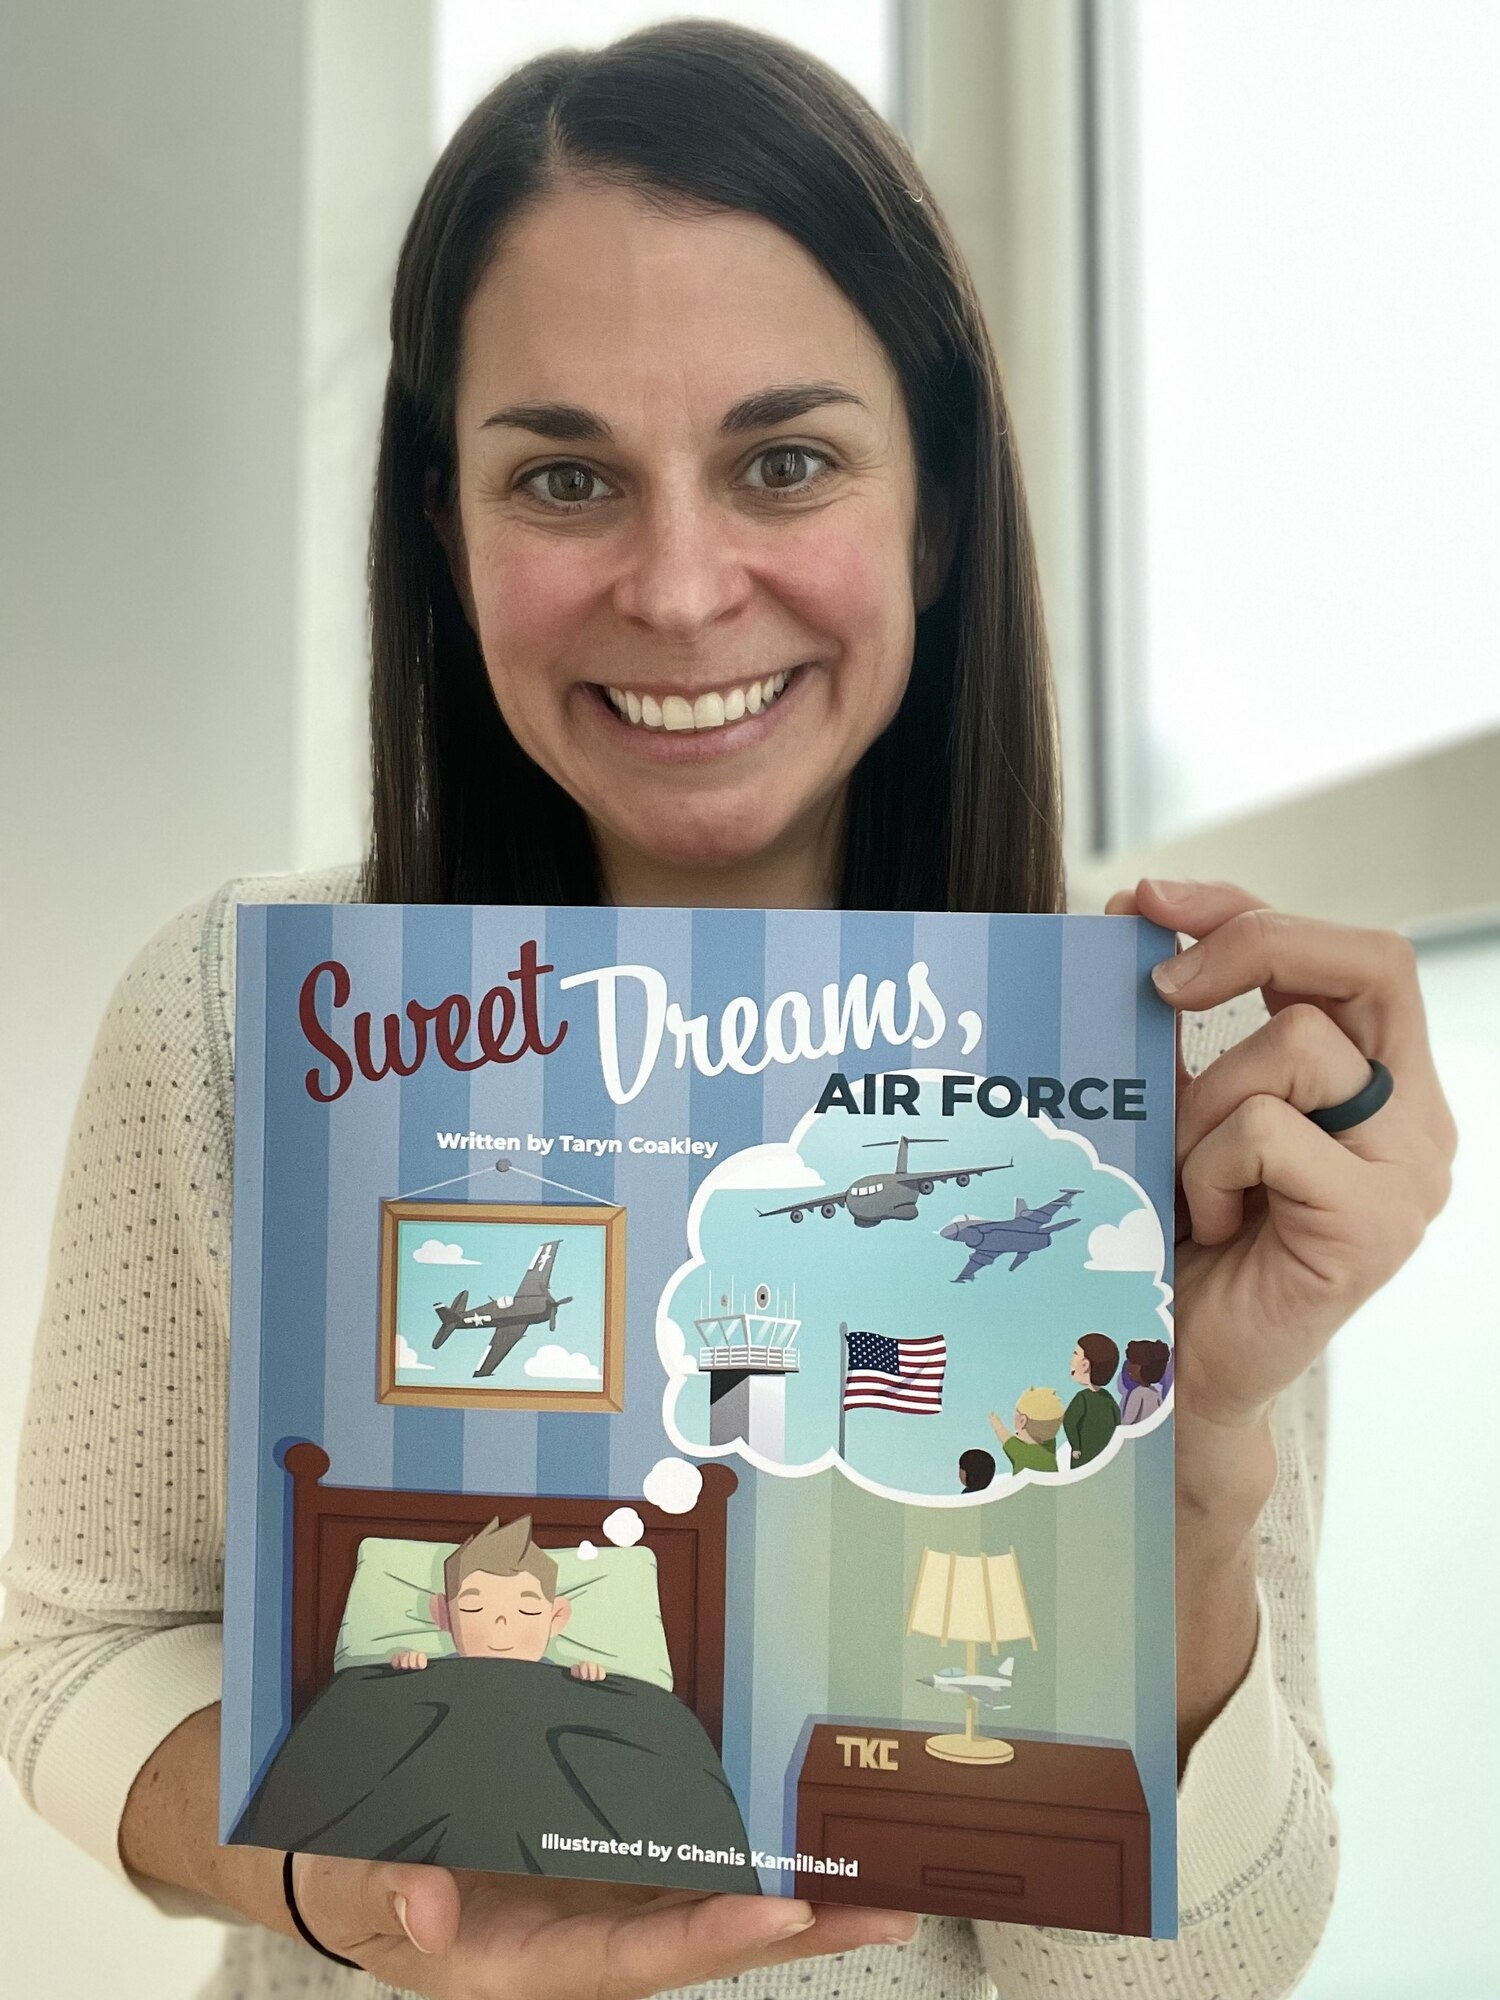 Taryn Coakley, 726th Air Mobility Squadron Key Spouse Mentor, presents a copy of her newly self-published children’s book "Sweet Dreams, Air Force" at Spangdahlem Air Base, Germany, Dec. 22, 2022.